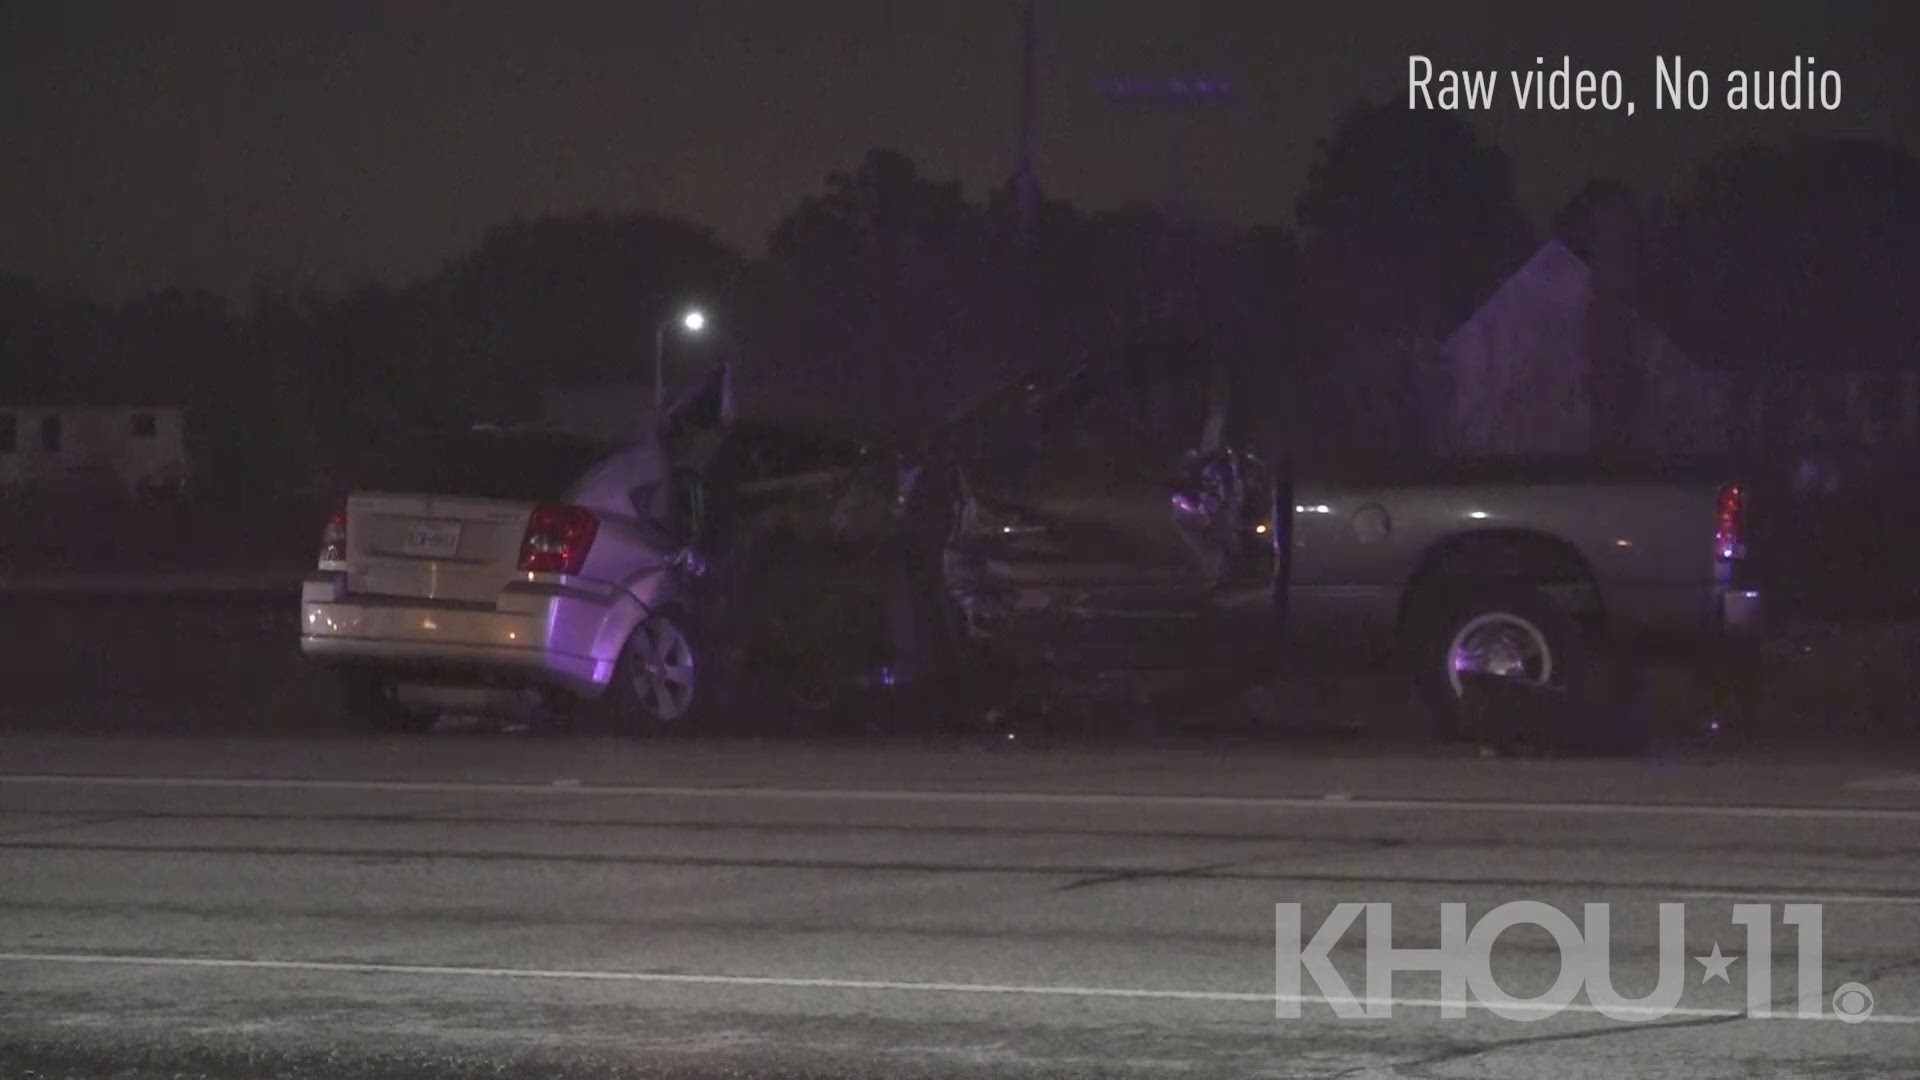 A pickup truck slammed into a car, killing an innocent passenger and injuring a driver, police in southeast Houston say. The crash happened at about 1 a.m. Friday on Galveston Road near Pineloch.